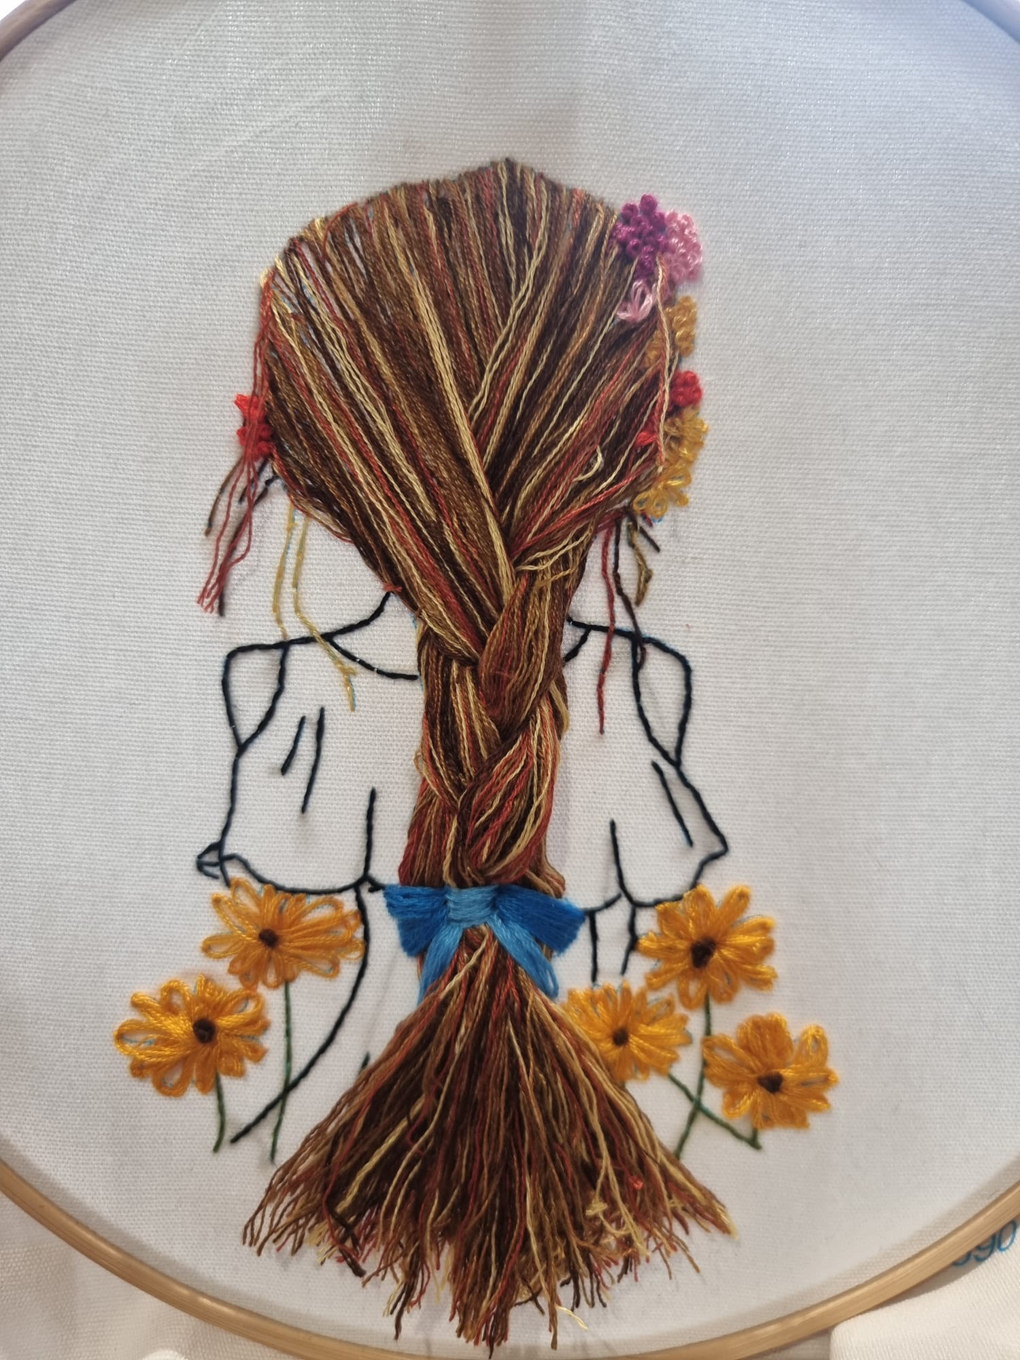 Embroidery of the back of a long haired girl